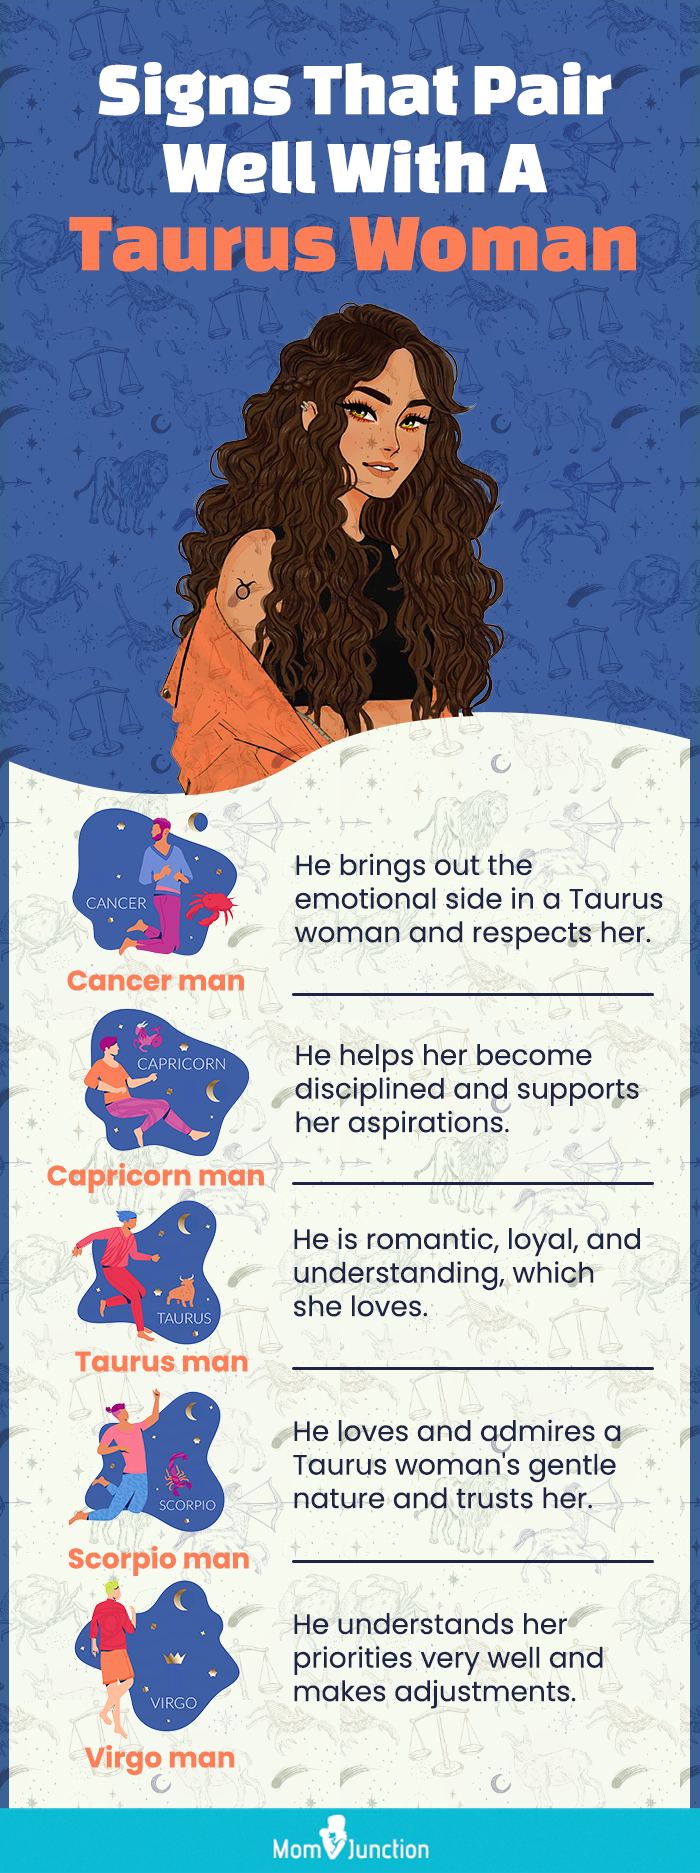 signs that pair well with a taurus woman (infographic)